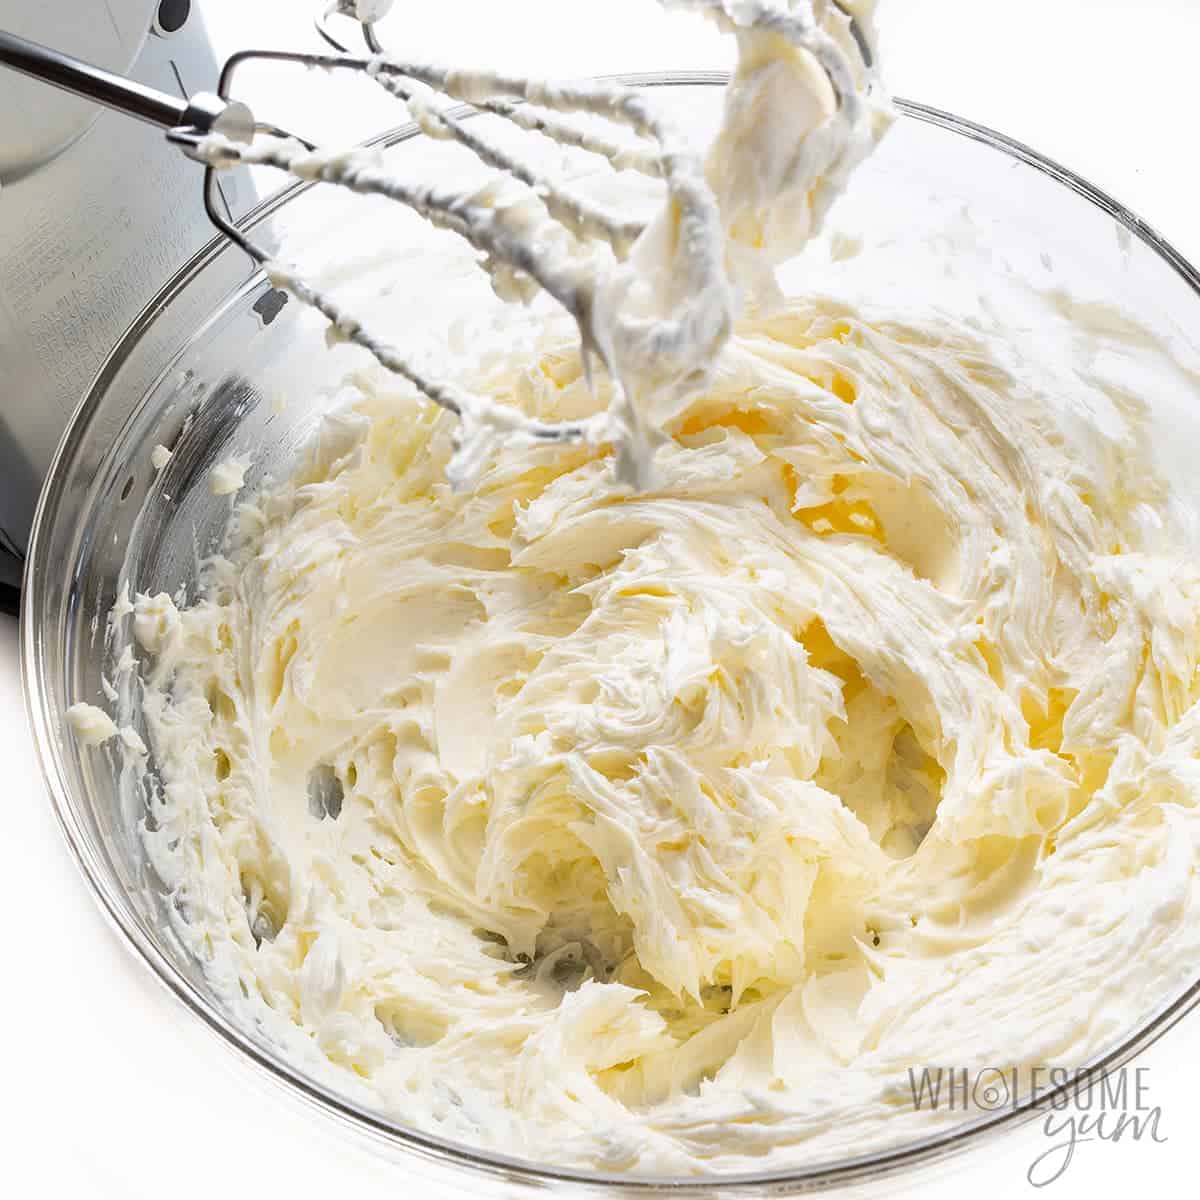 Butter and sweetener creamed in a bowl